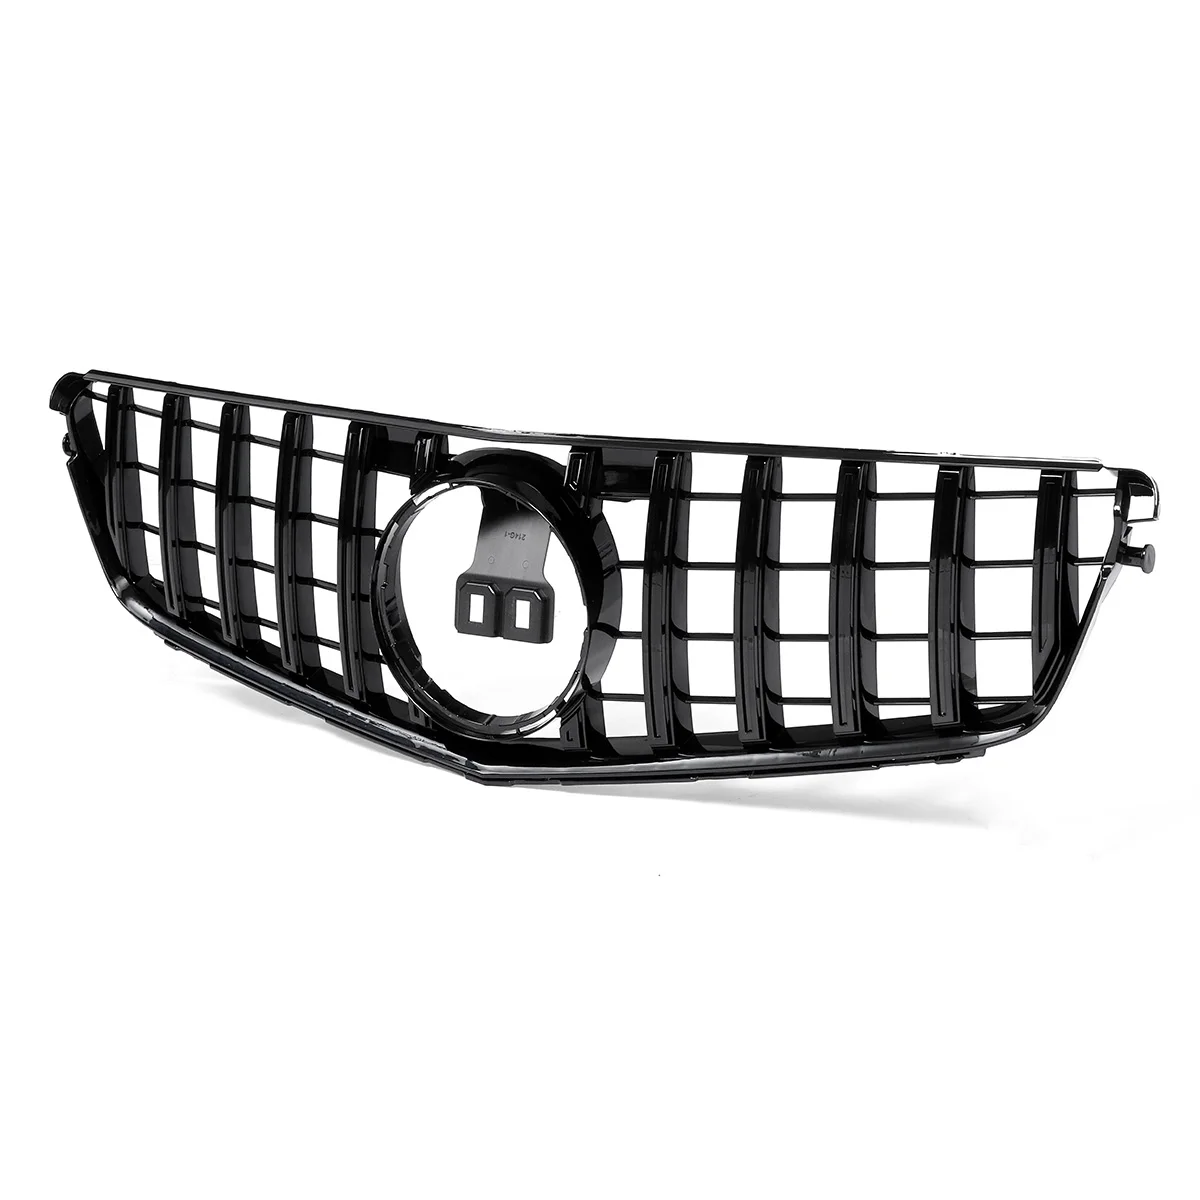 

GTR Style Car Front Bumper Grille Grill For Mercedes For Benz C-Class W204 C180 C200 C300 2008-2014 Front Upper Racing Grill